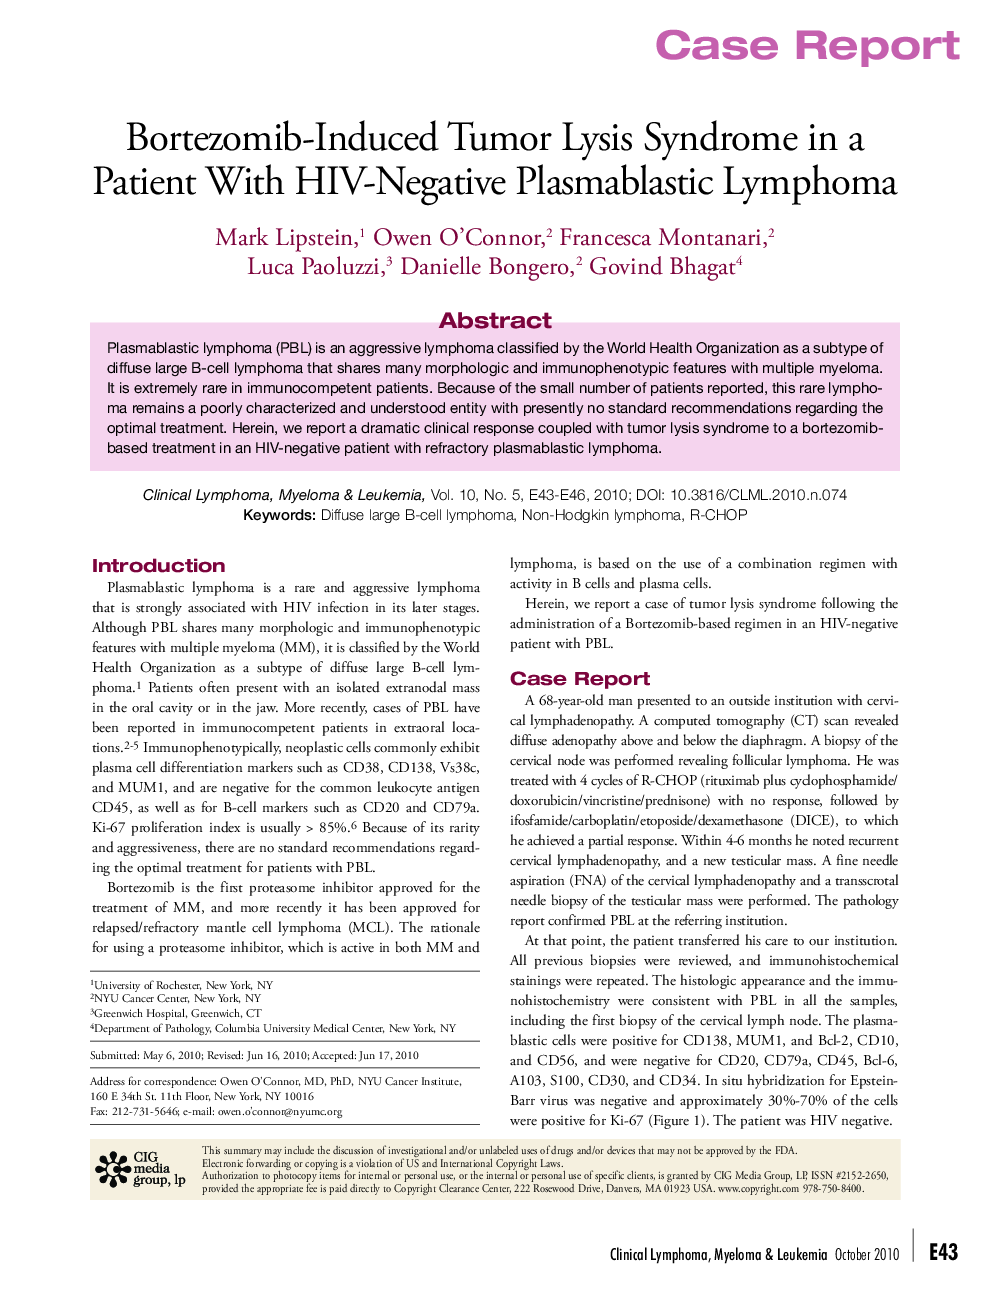 Bortezomib-Induced Tumor Lysis Syndrome in a Patient With HIV-Negative Plasmablastic Lymphoma 